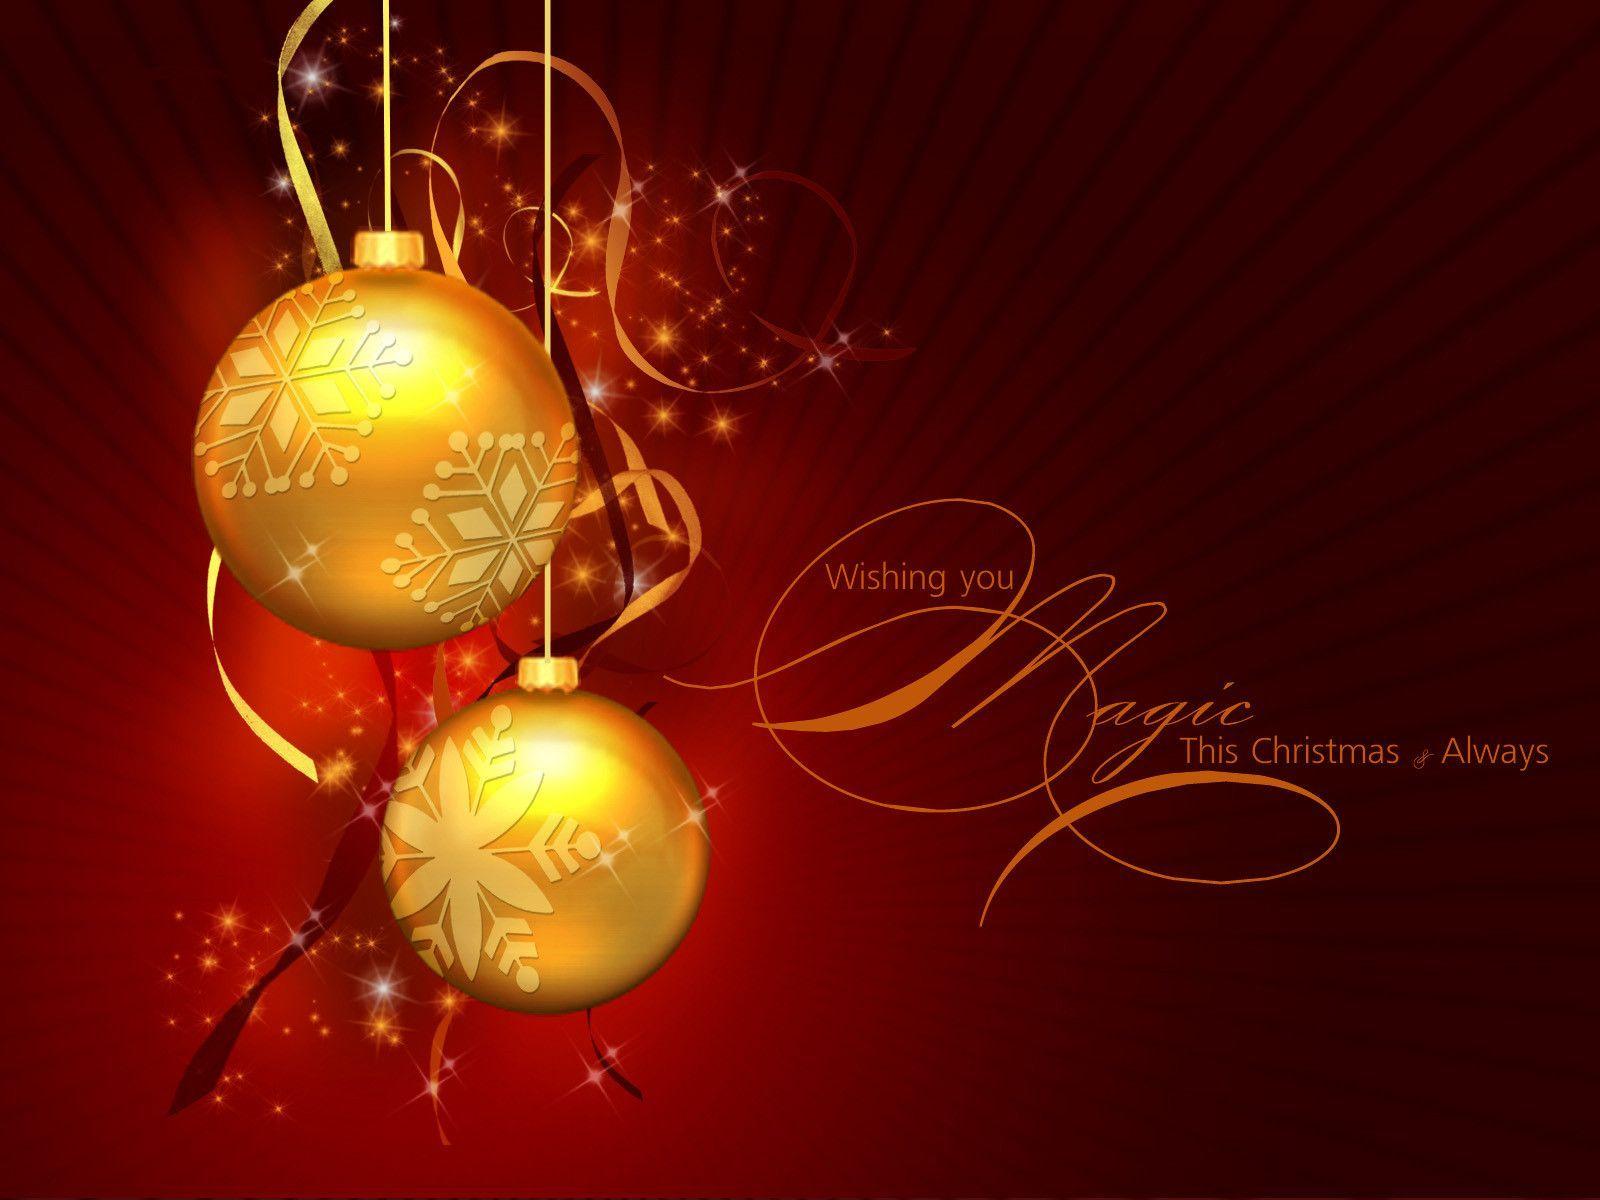 Merry Christmas Wallpaper 35542 High Resolution. download all